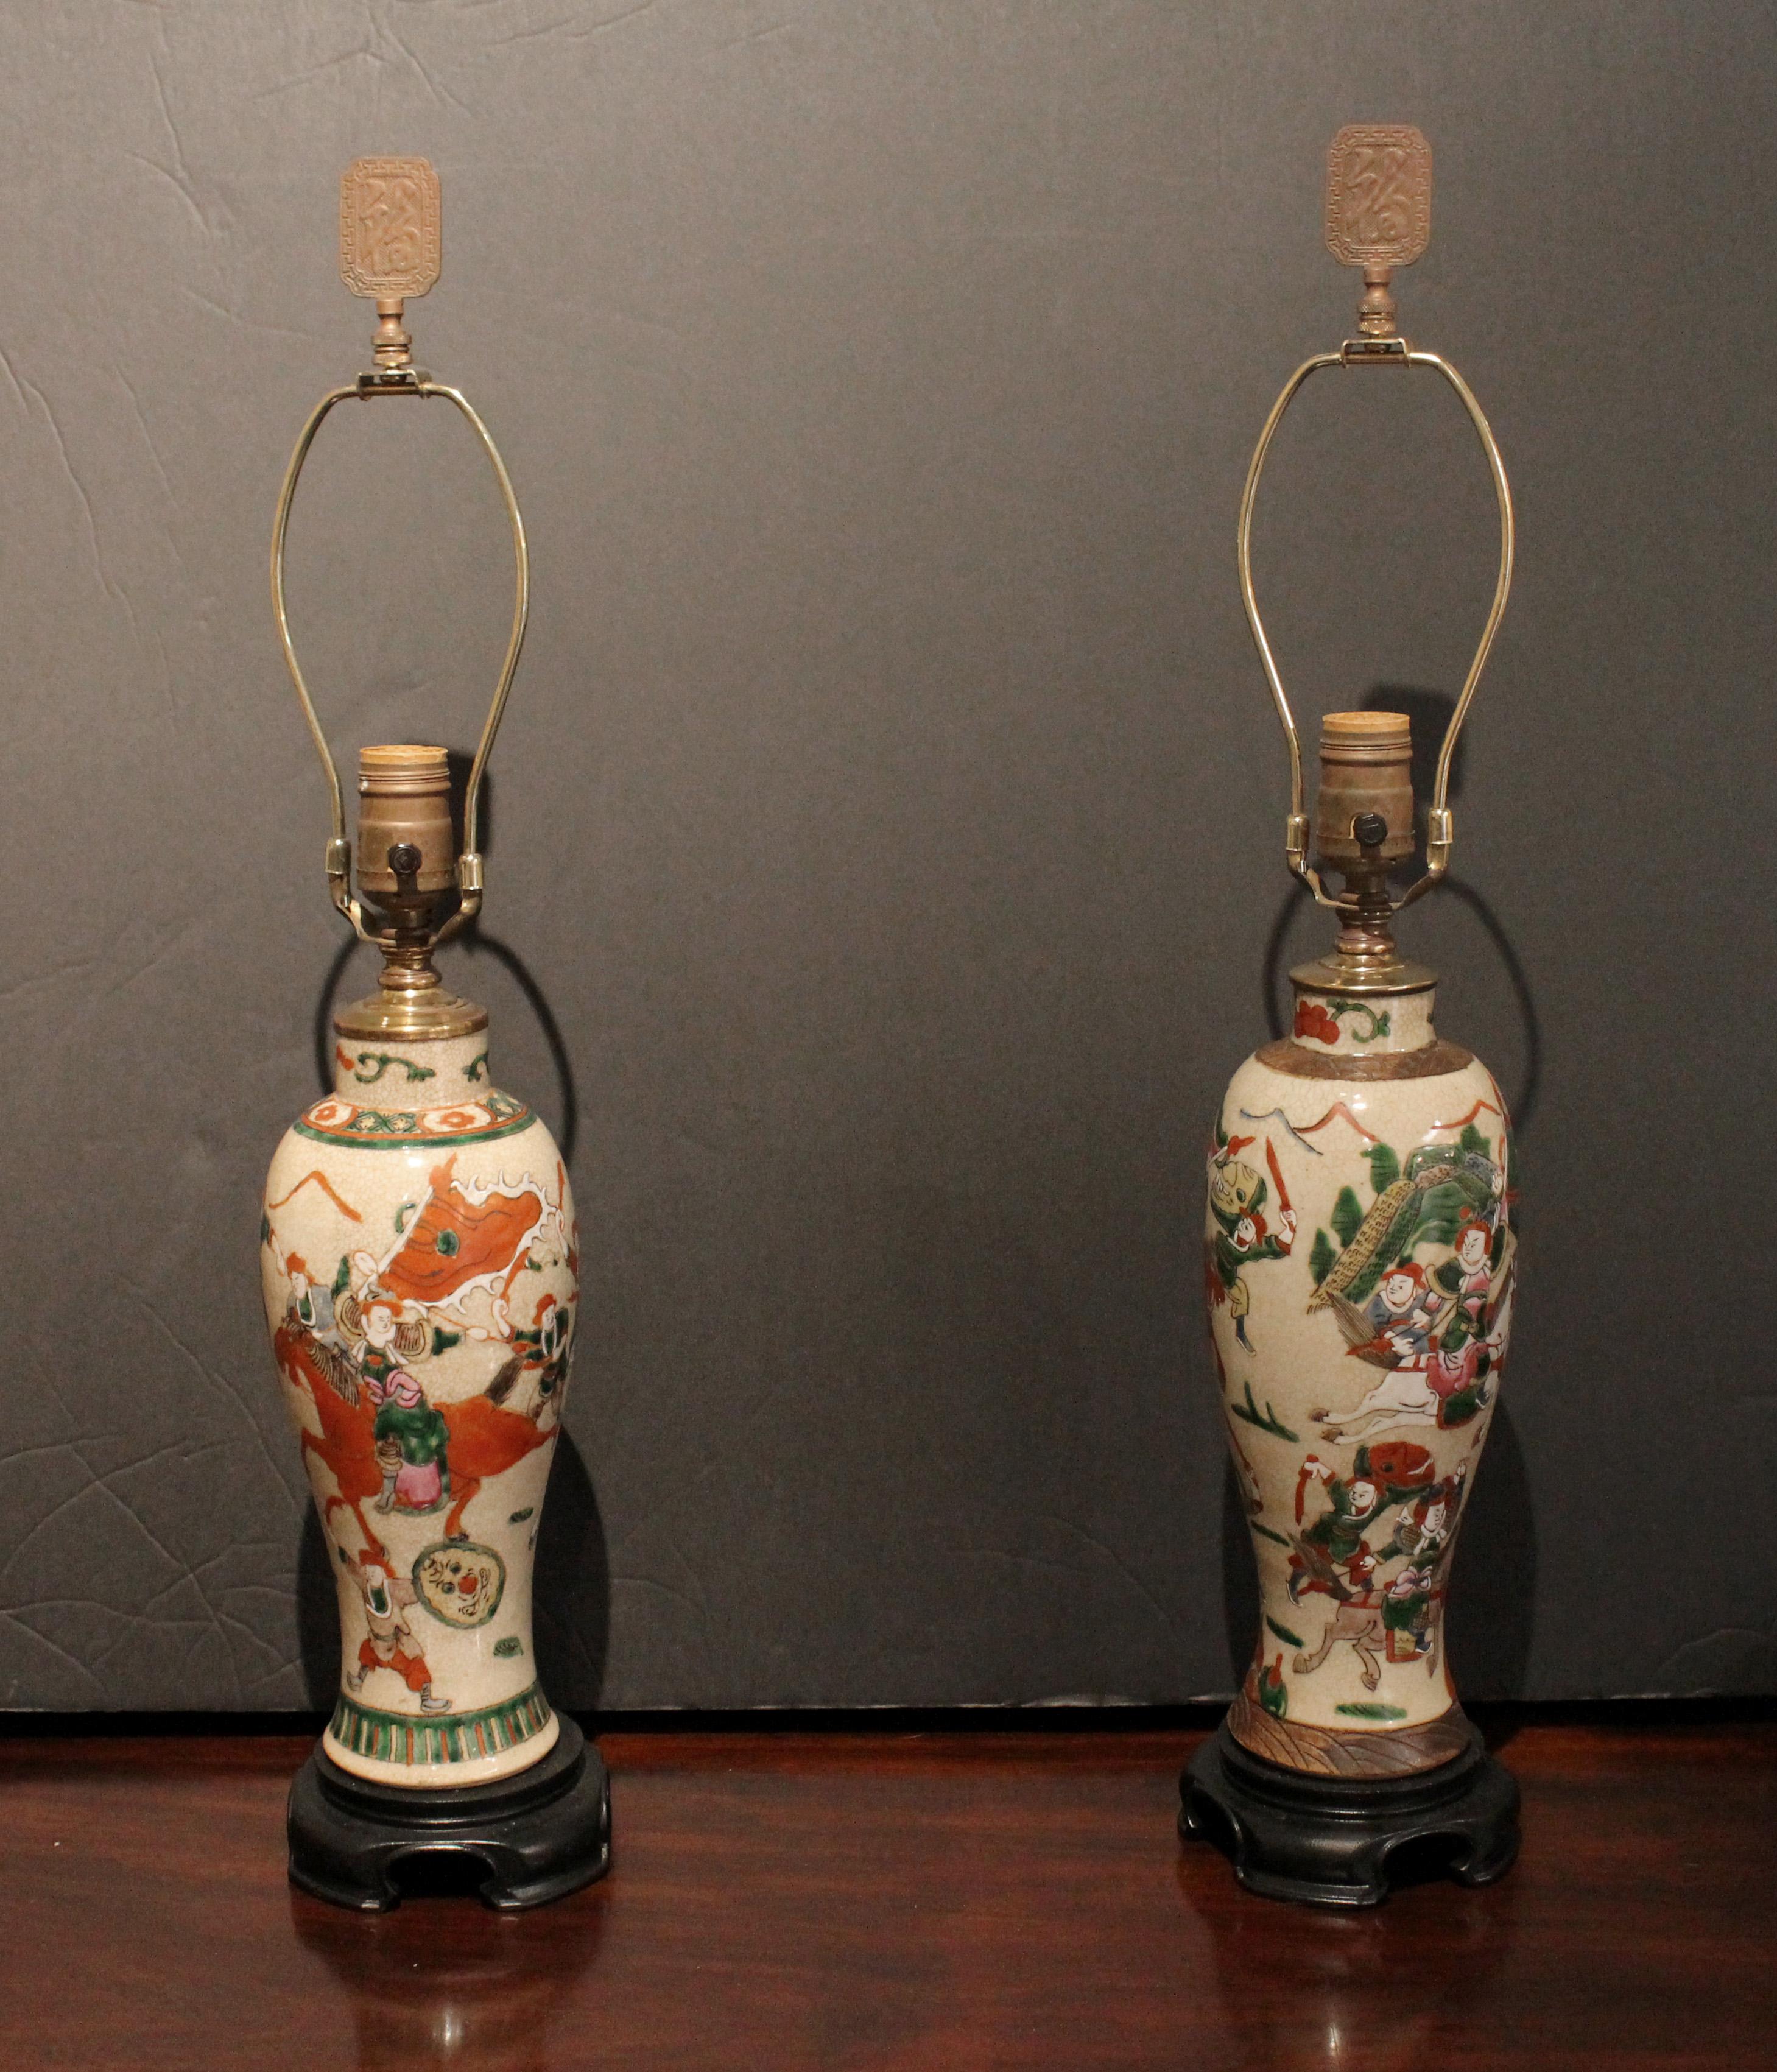 Late 19th century pair of Nanking crackle glaze vases converted to lamps, Chinese. Qing dynasty. Designer Otto Zenke mounted these as lamps for 